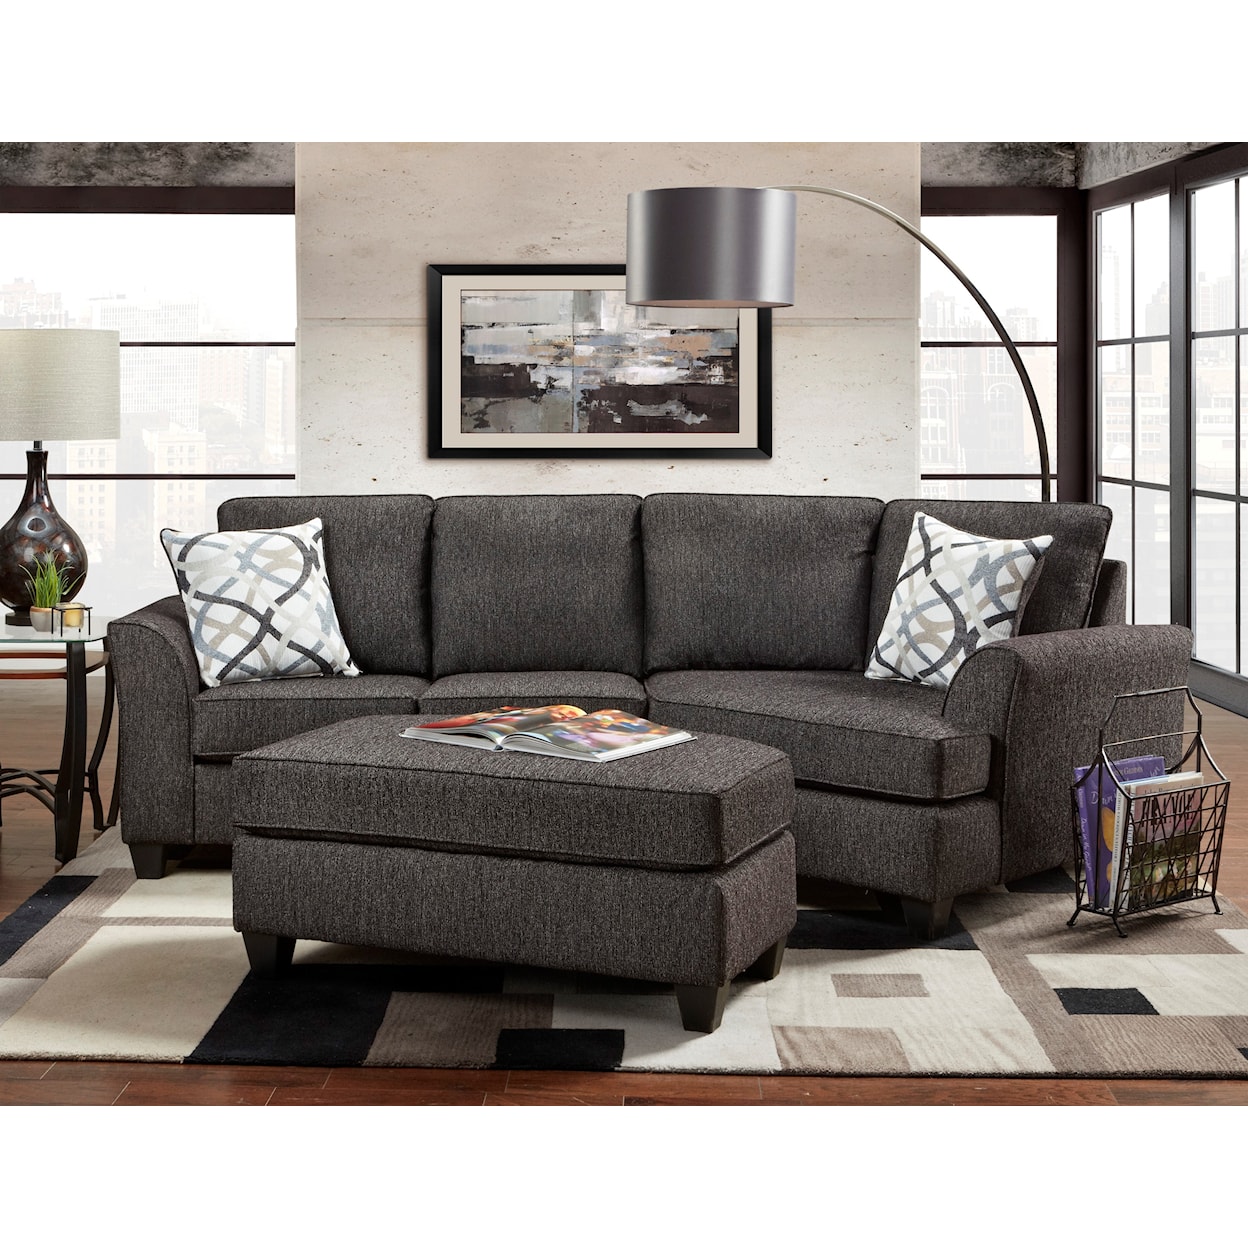 Behold Home WF5200 Tuxedo 2-Piece Sectional